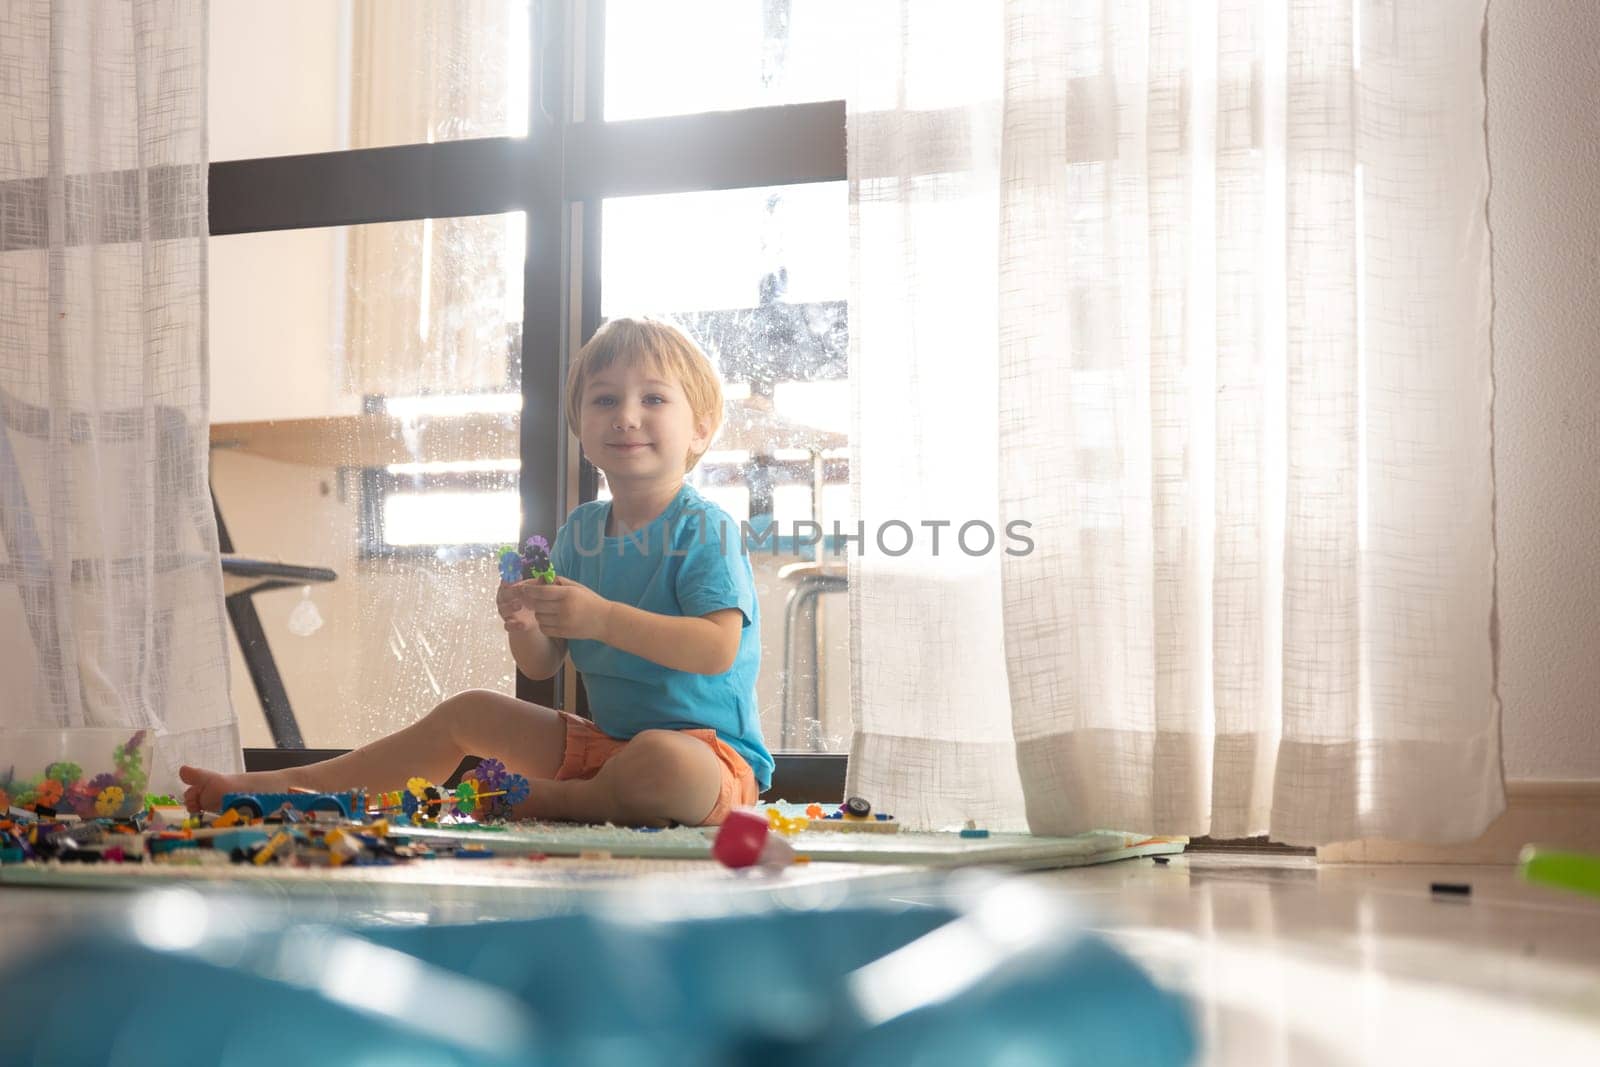 Photo of a Playful Toddler Engrossed in Imaginative Toy Exploration by Studia72